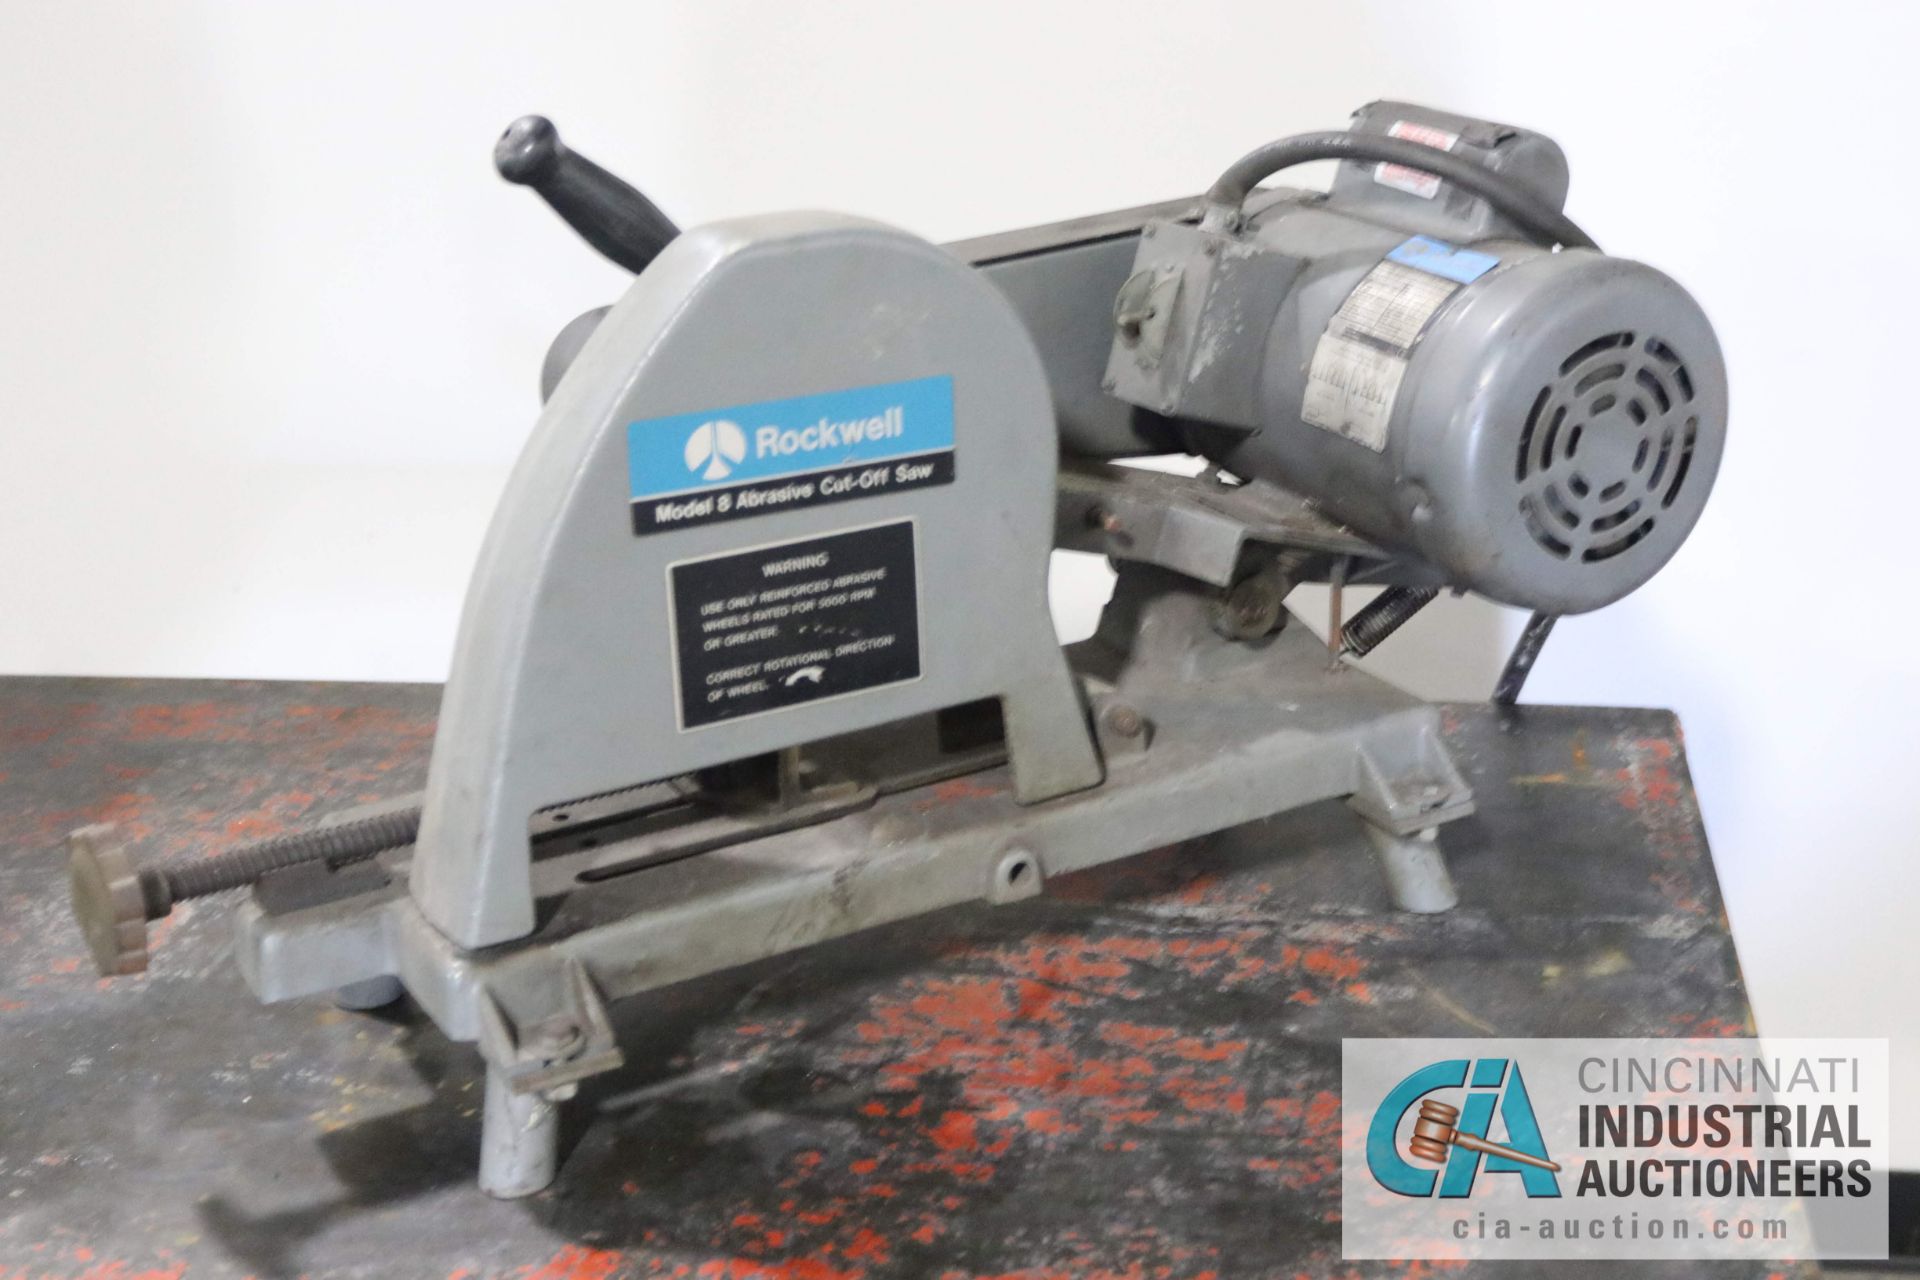 3 HP ROCKWELL MODEL 8 ABRASIVE CUTOFF SAW; S/N 438-02-3140808, SINGLE PHASE - Located in Holland,